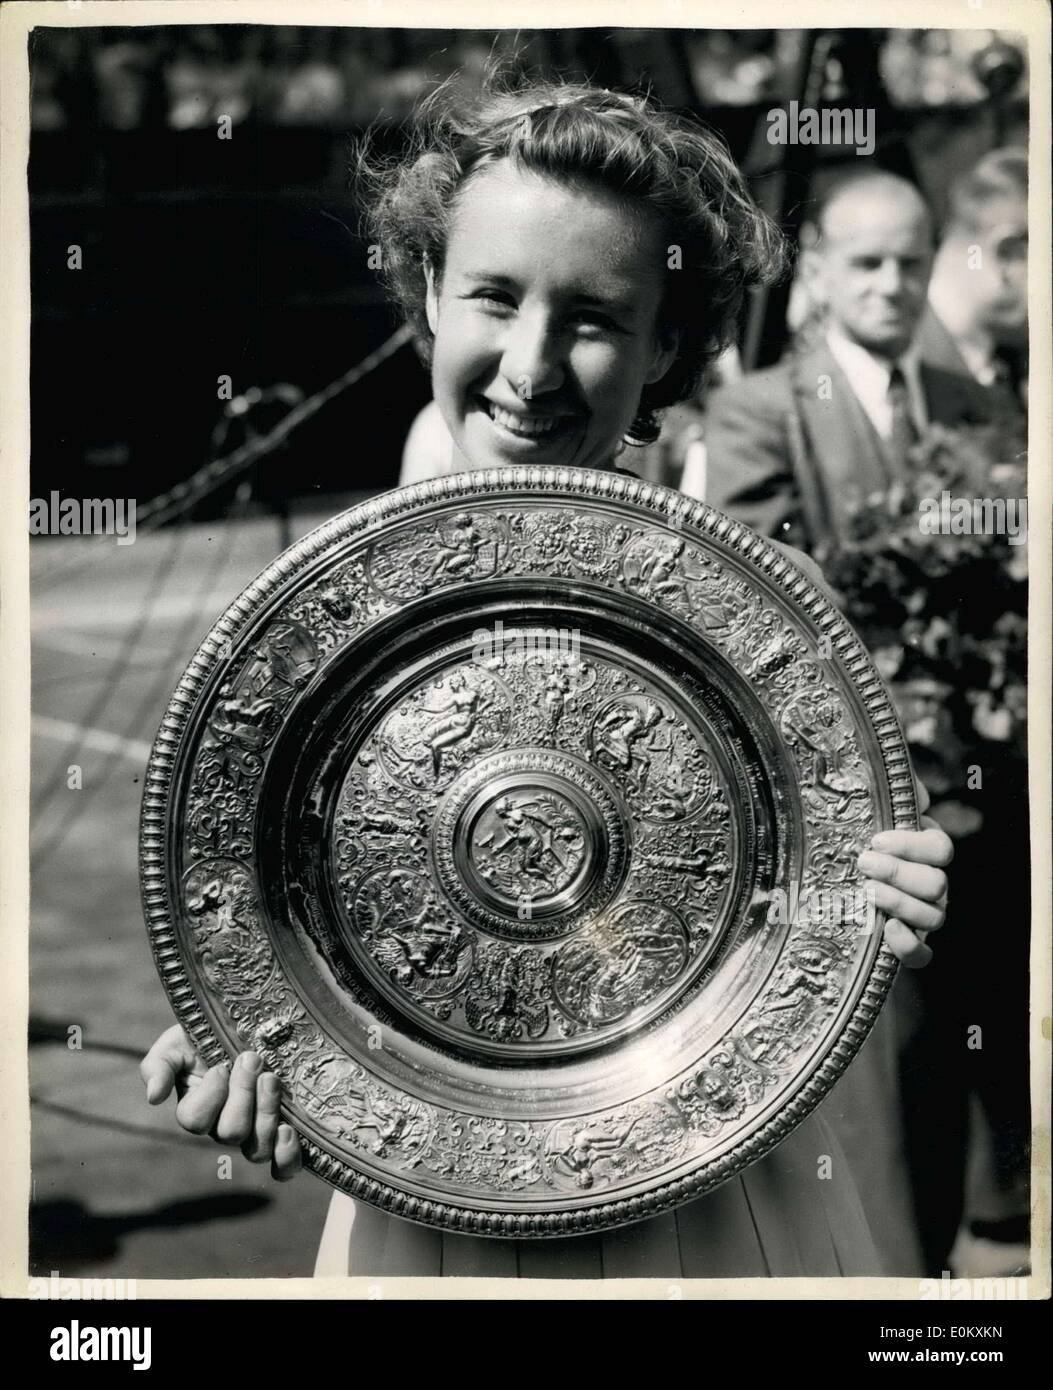 Jul. 05, 1952 - ''Little Mo'' Wins Tennis Final: Miss Maureen Connolly (Little Mo) U.S.A., today beat Miss Louise Brough, U.S.A. in the Women's Singles Final at Wimbledon today. photo shows. Miss Maureen Connolly photographed with her trophy after her victory today. Stock Photo